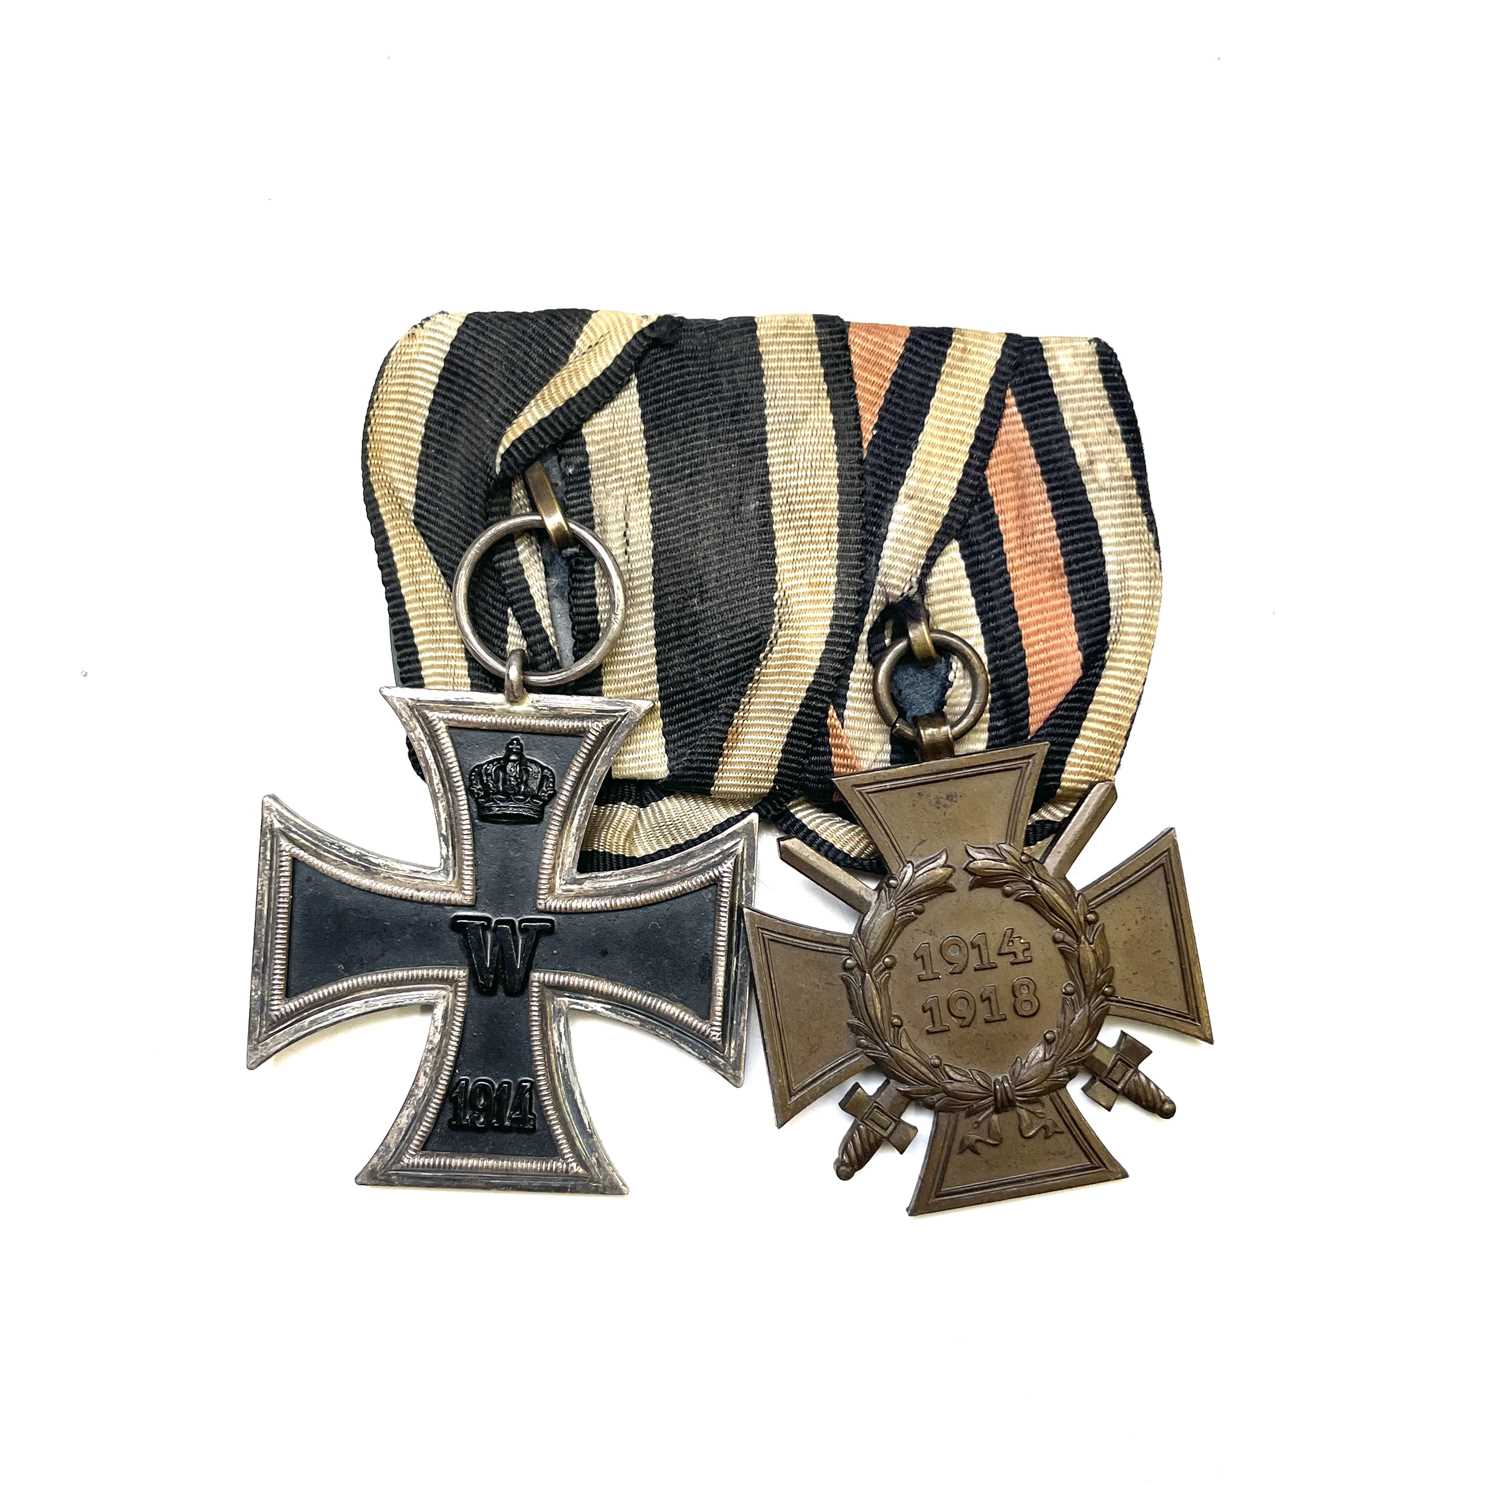 Lot 225 - Germany WWI - Iron Cross Medal pair.